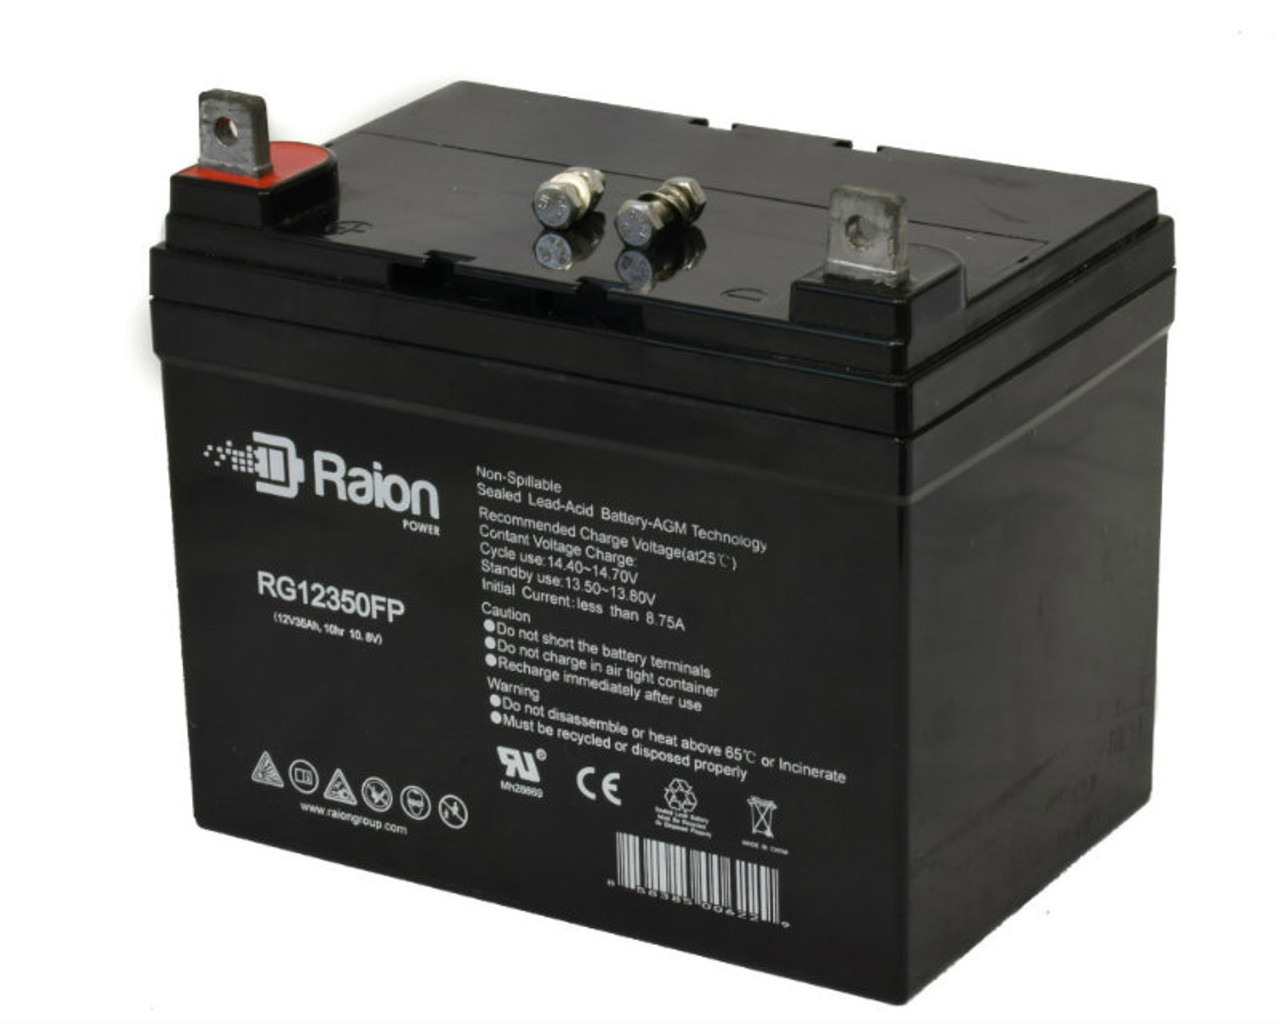 Raion Power Replacement 12V 35Ah RG12350FP Mobility Scooter Battery for Everest & Jennings Wheelchairs Sabre ES-GT